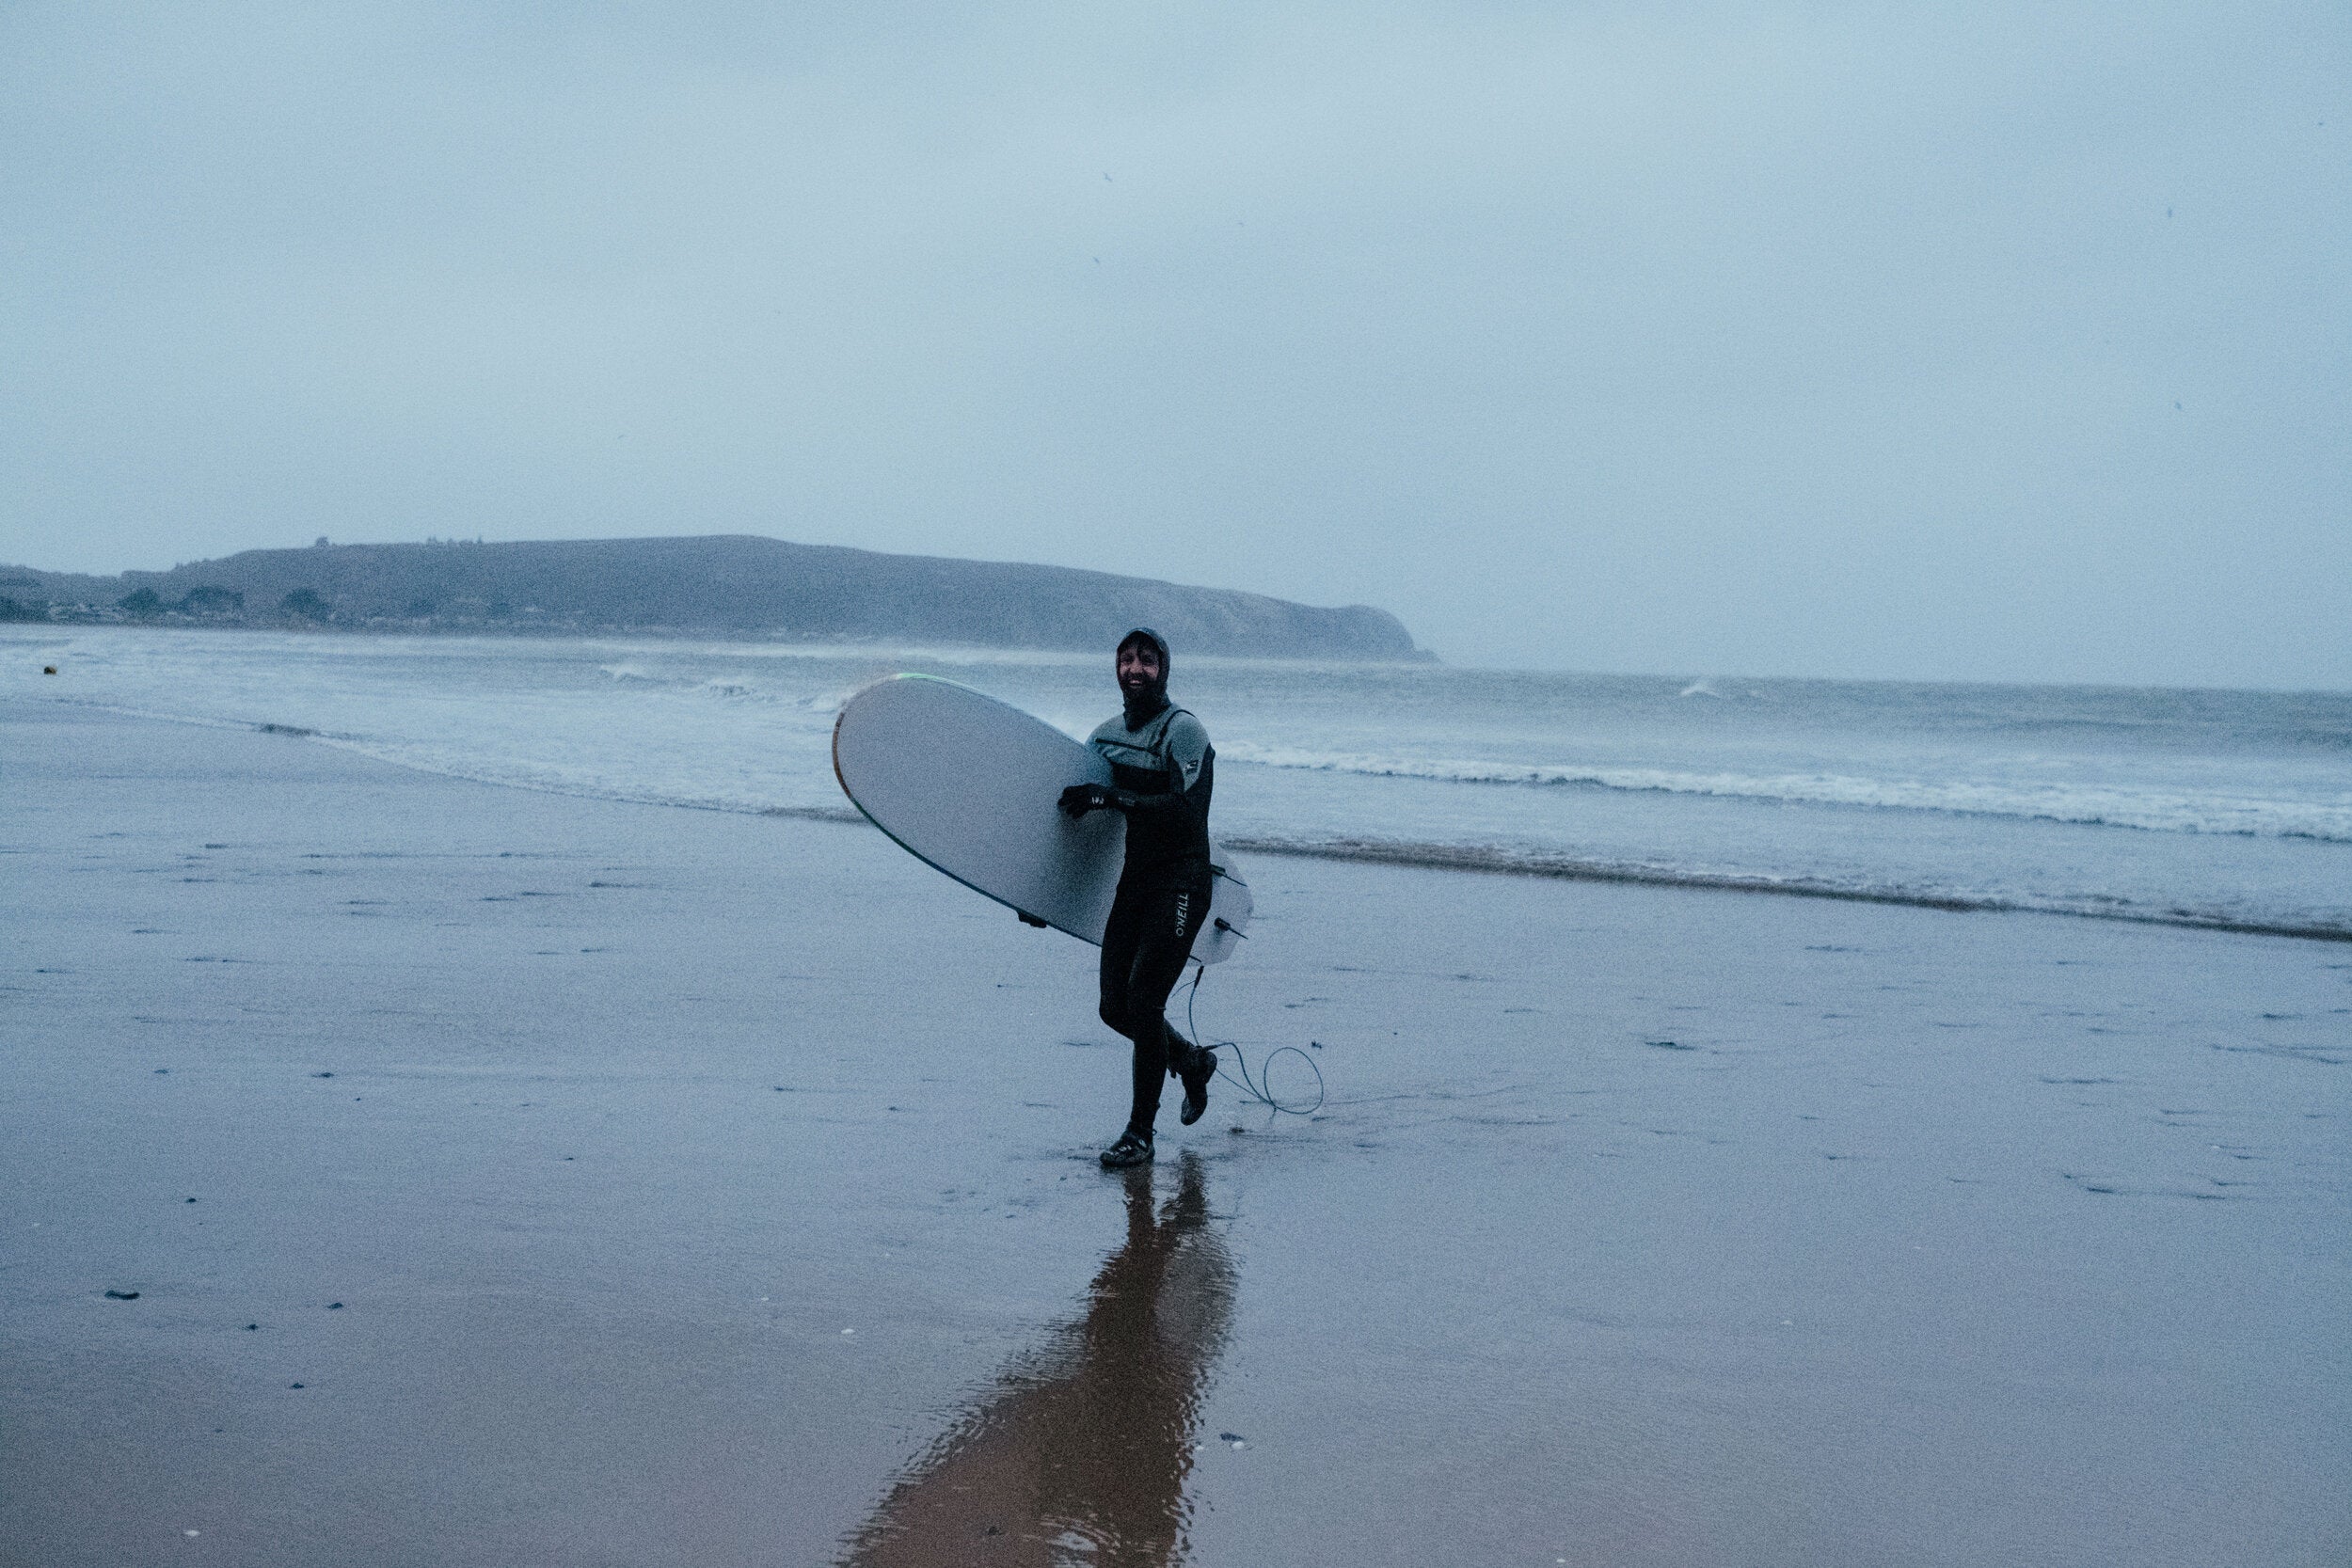 Craig Hyde surfing in North Wales